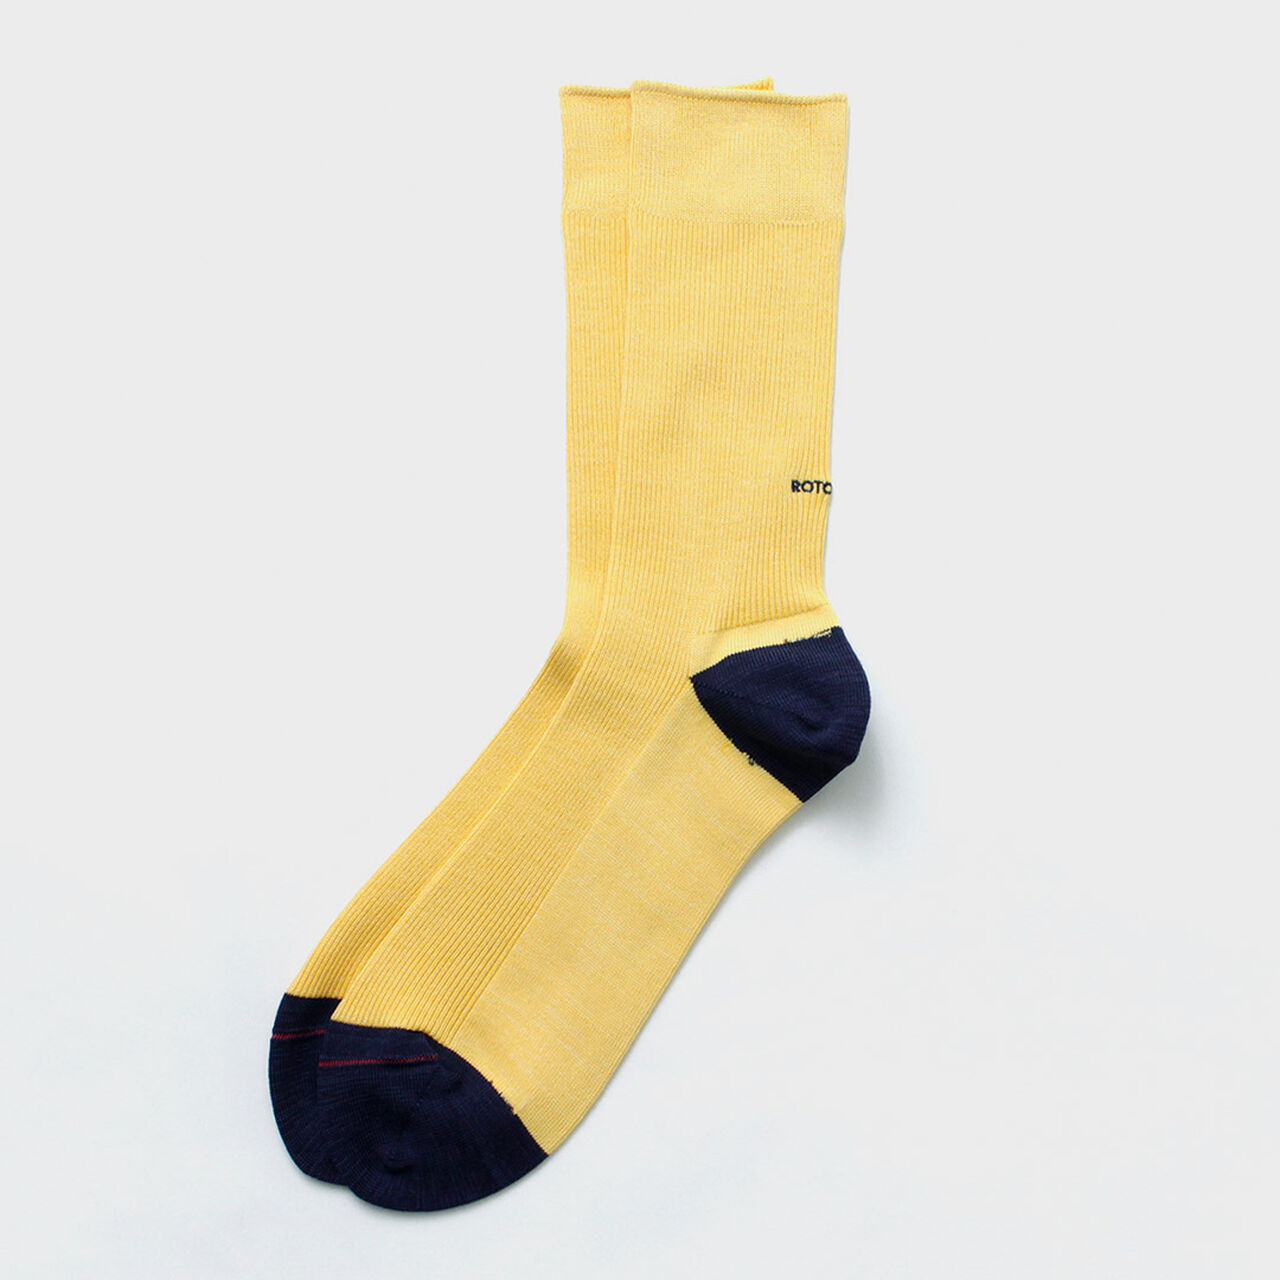 Organic Cotton & Recycled Polyester Ribbed Crew Socks,LightYellow_Navy, large image number 0